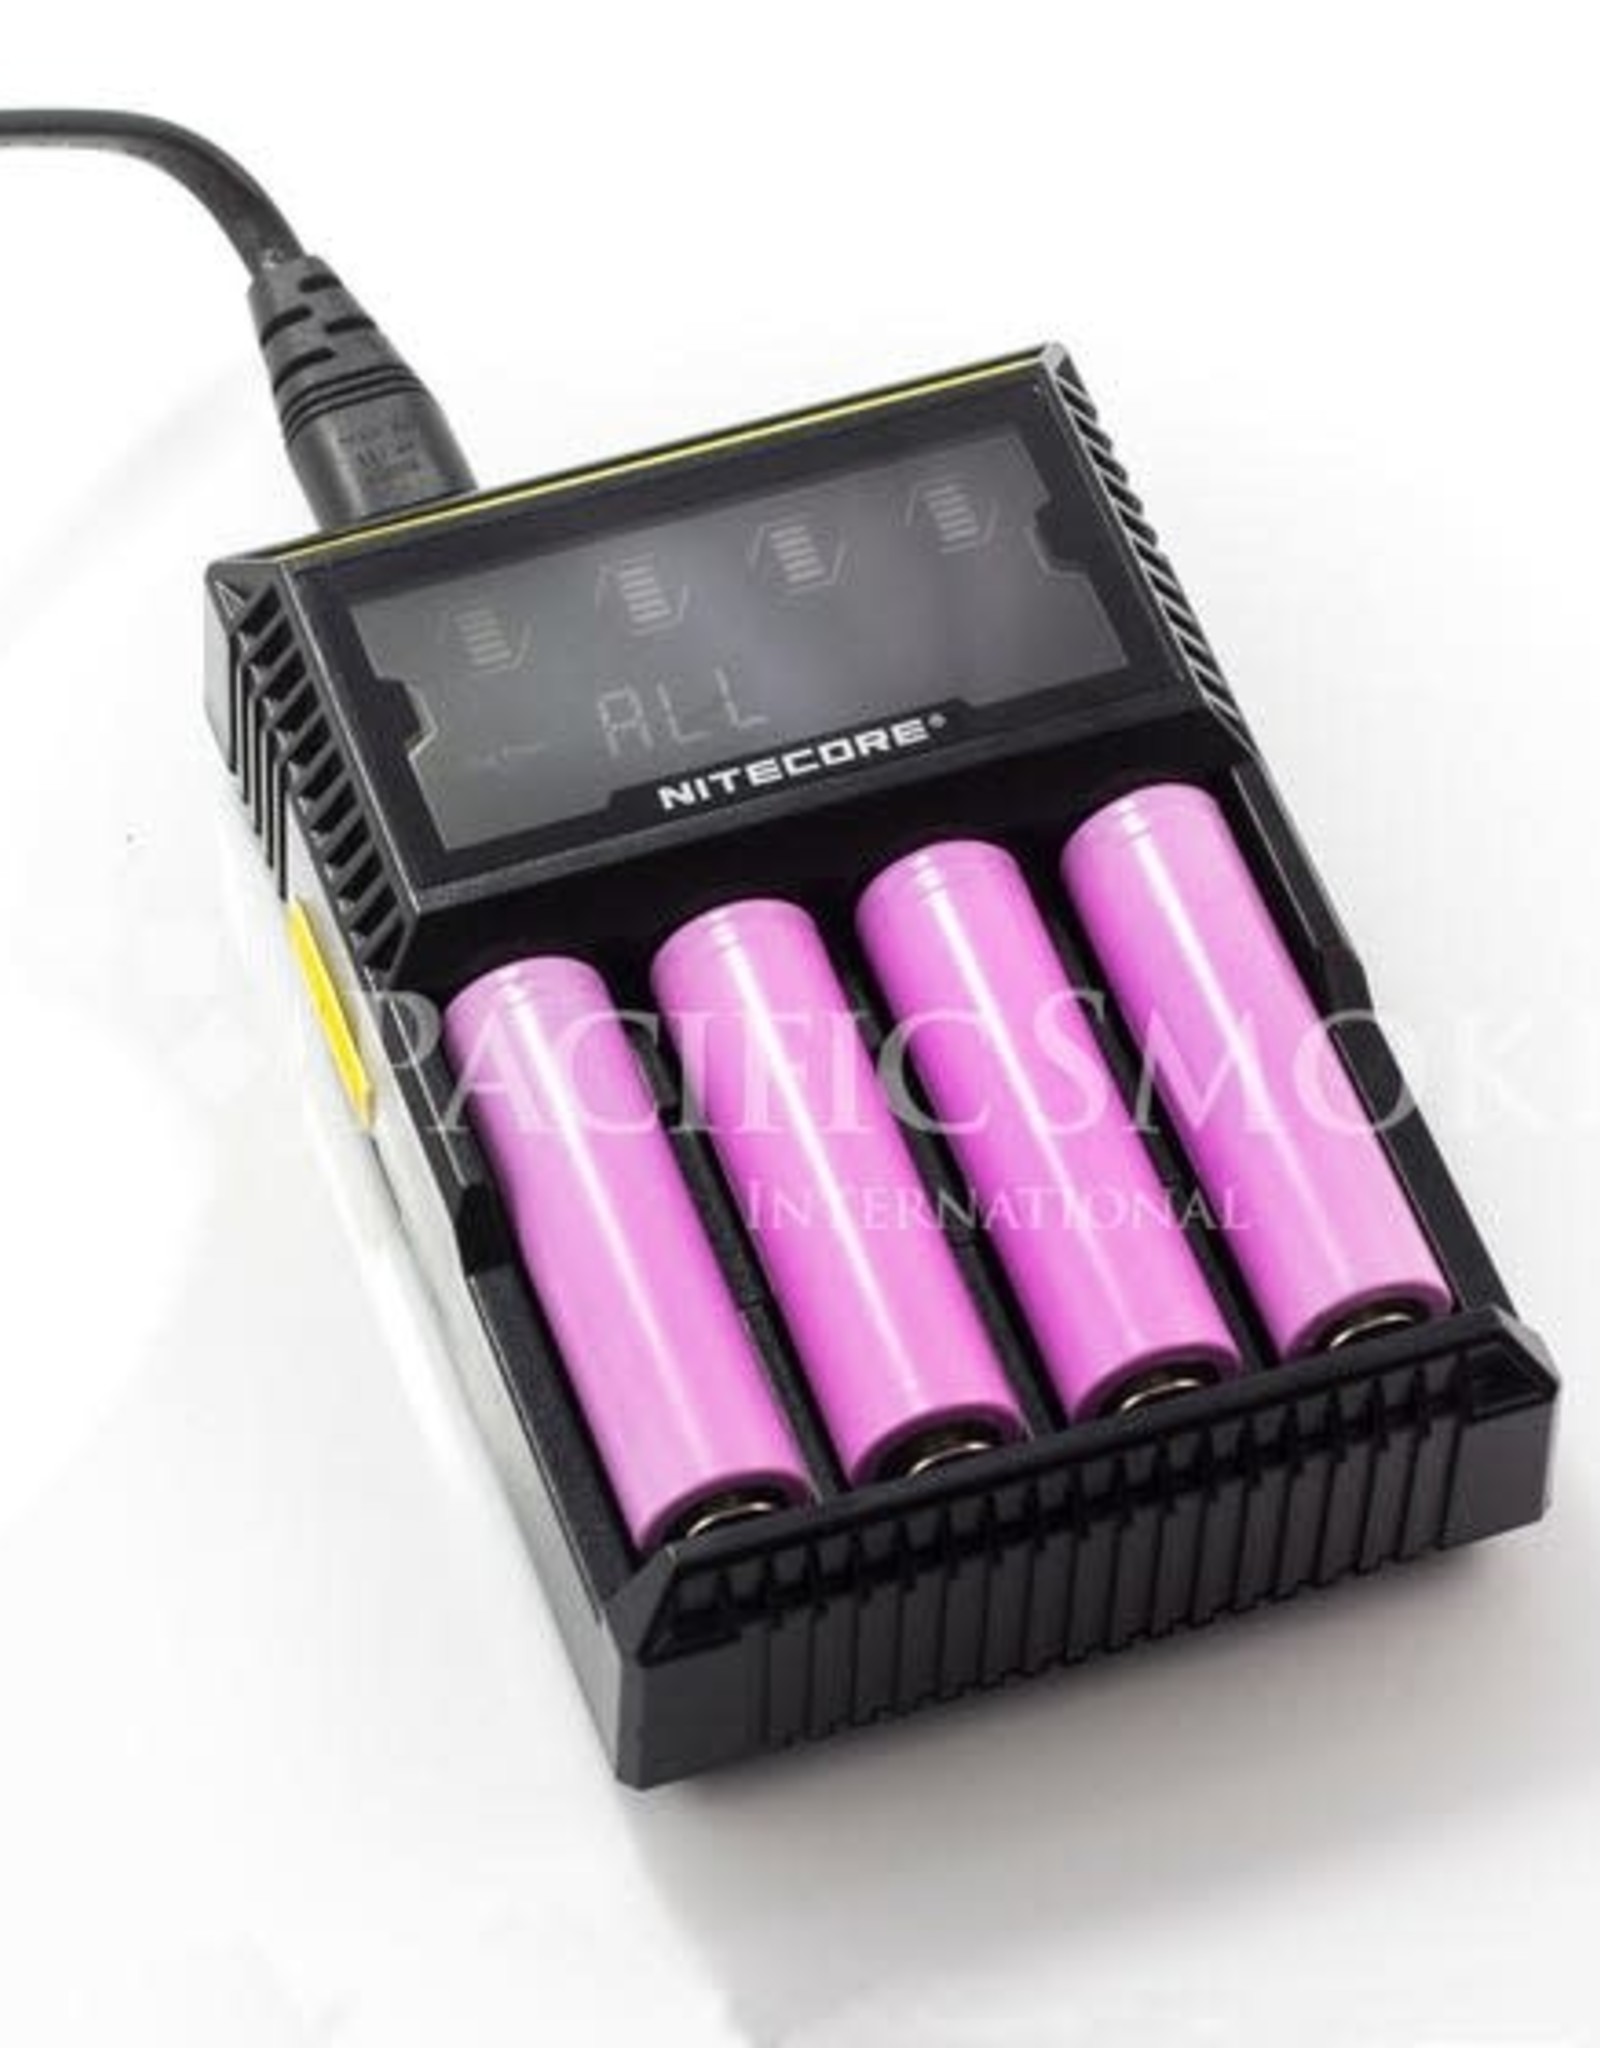 Nitecore Digcharger D4 LCD Charger